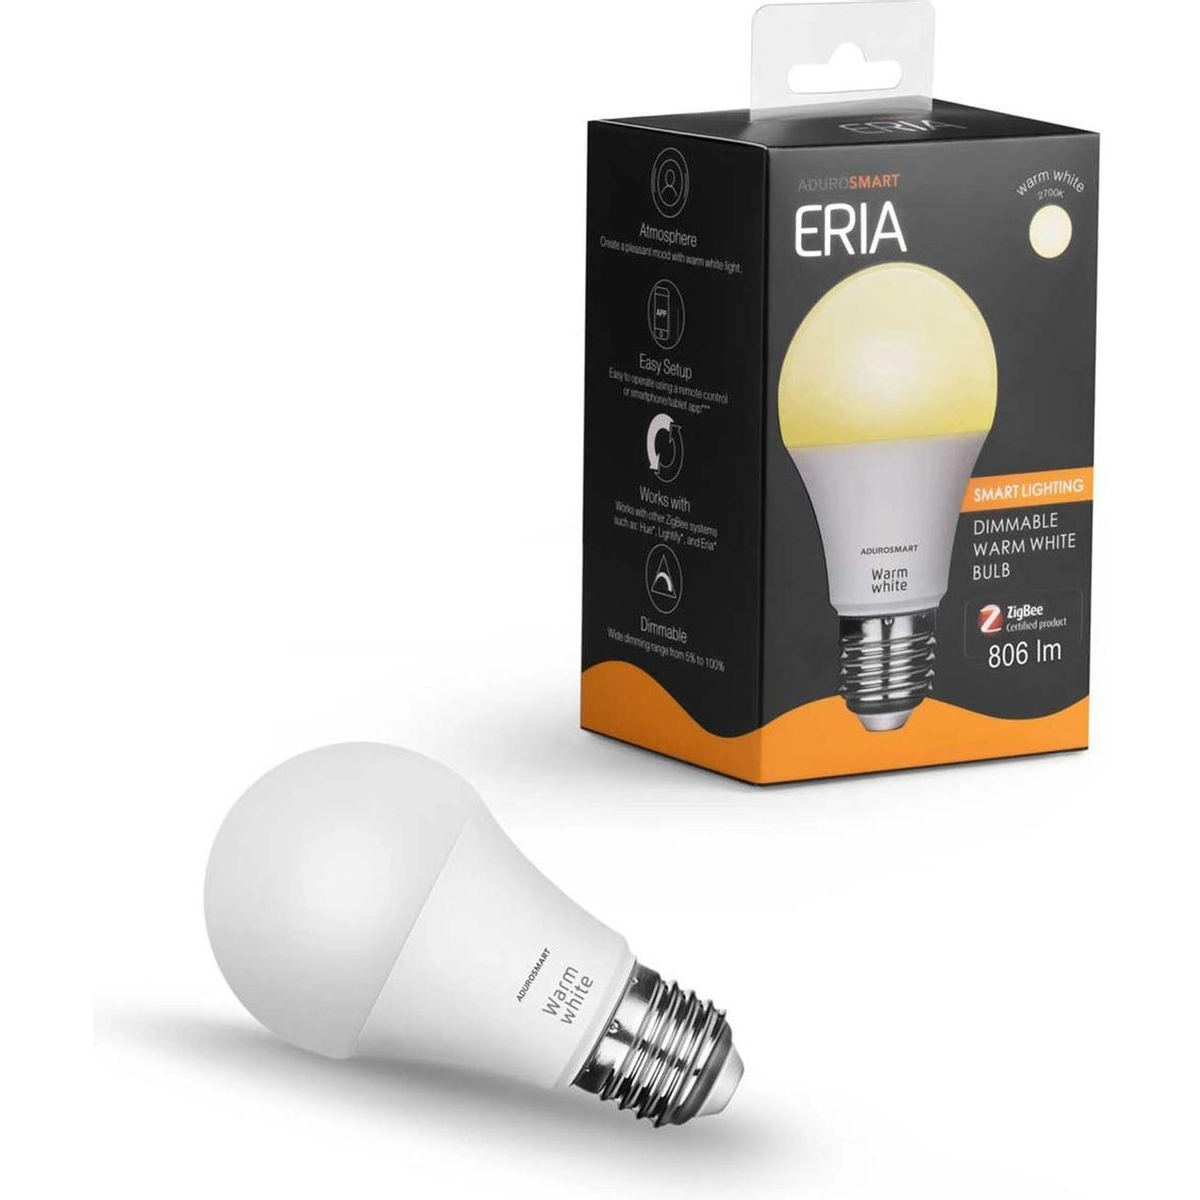 ERIA Dimmable Warm White Bulb 806lm